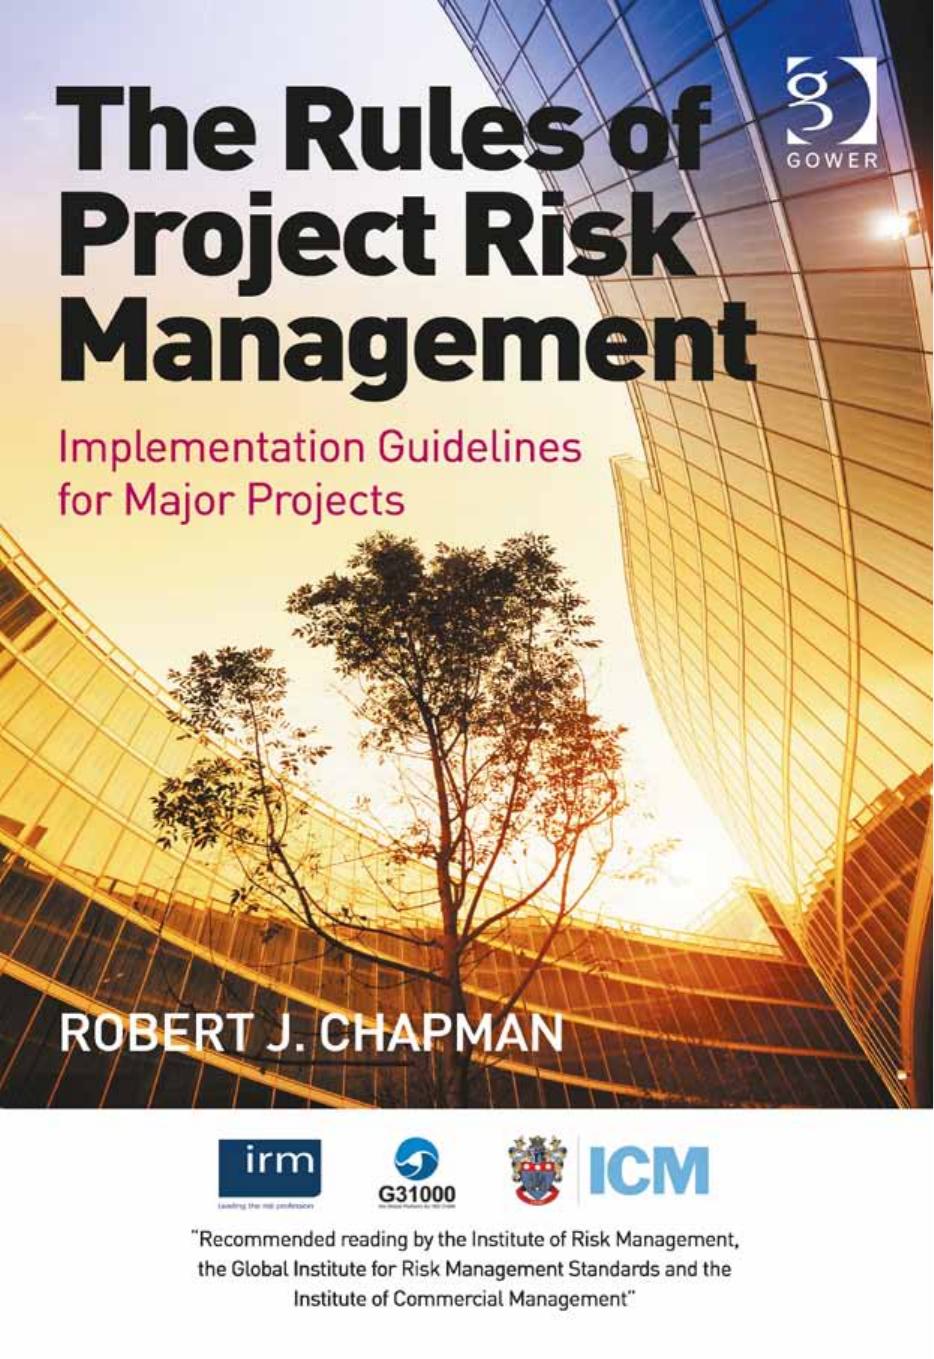 The Rules of Project Risk Management: Implementation Guidelines for Major Projects